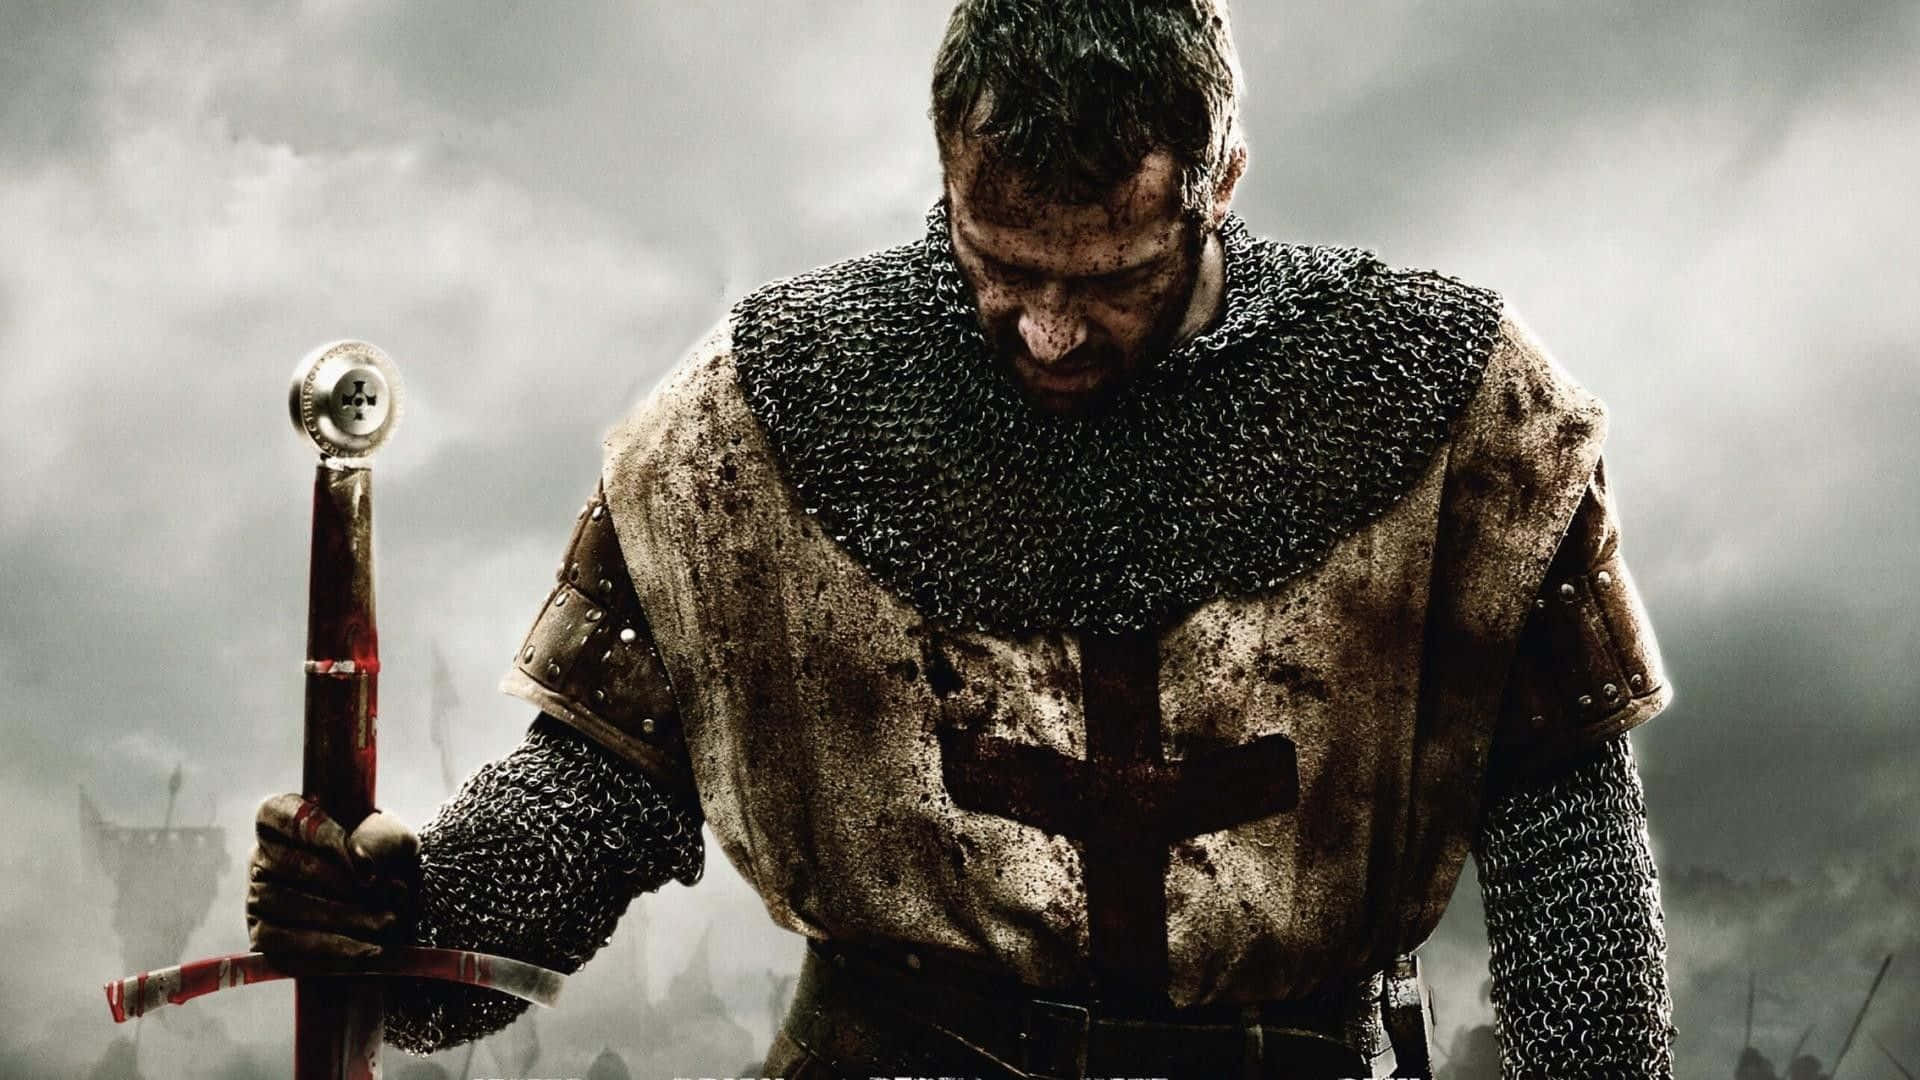 A fierce Crusader stands ready to defend their cause Wallpaper